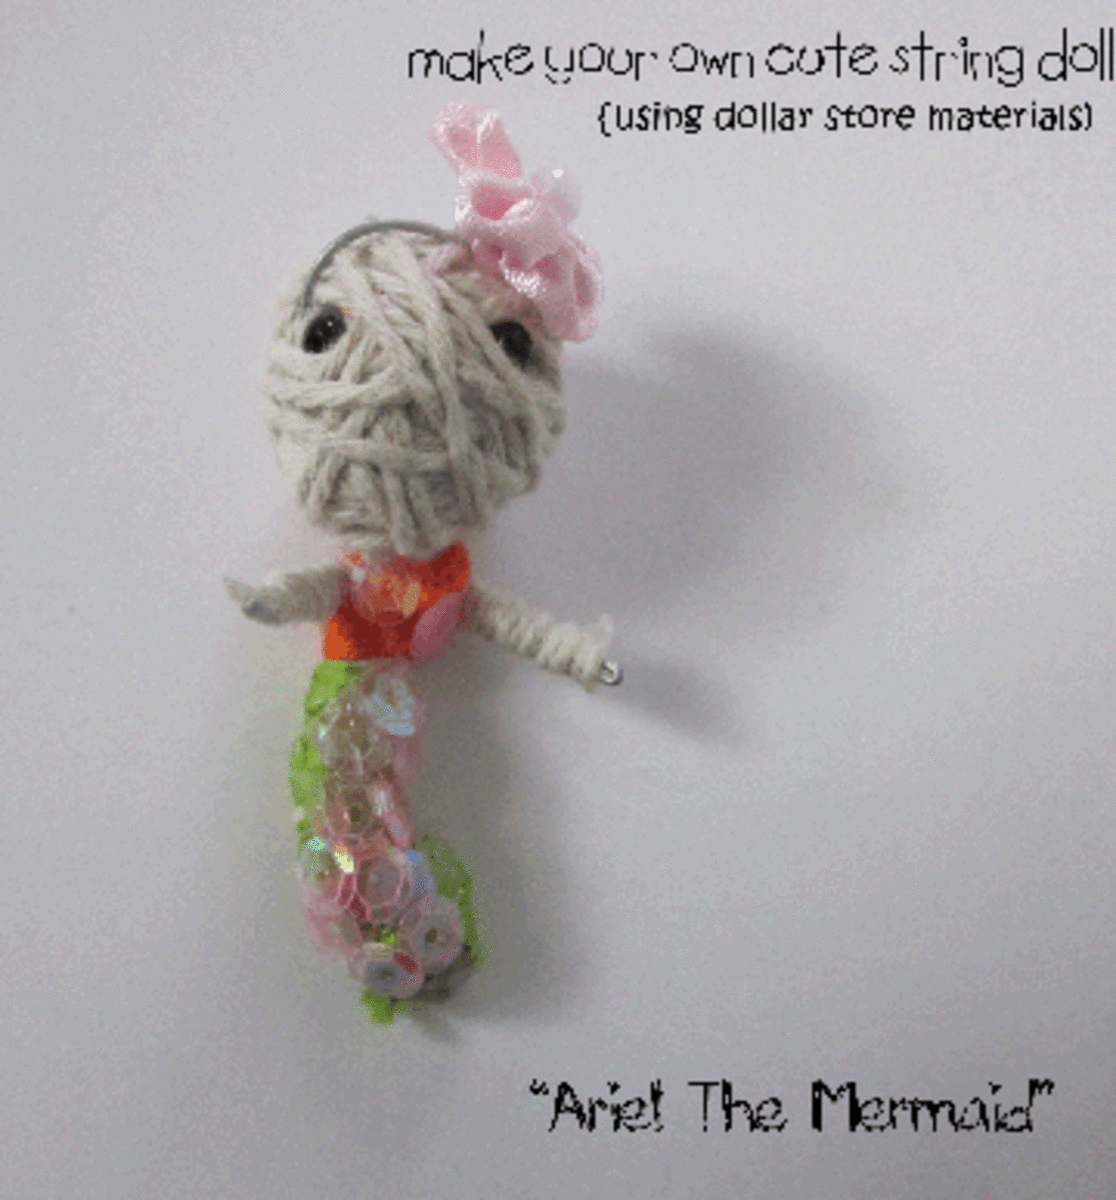 String Doll Idea #2: add colored string and sequins...whala  a mermaid.